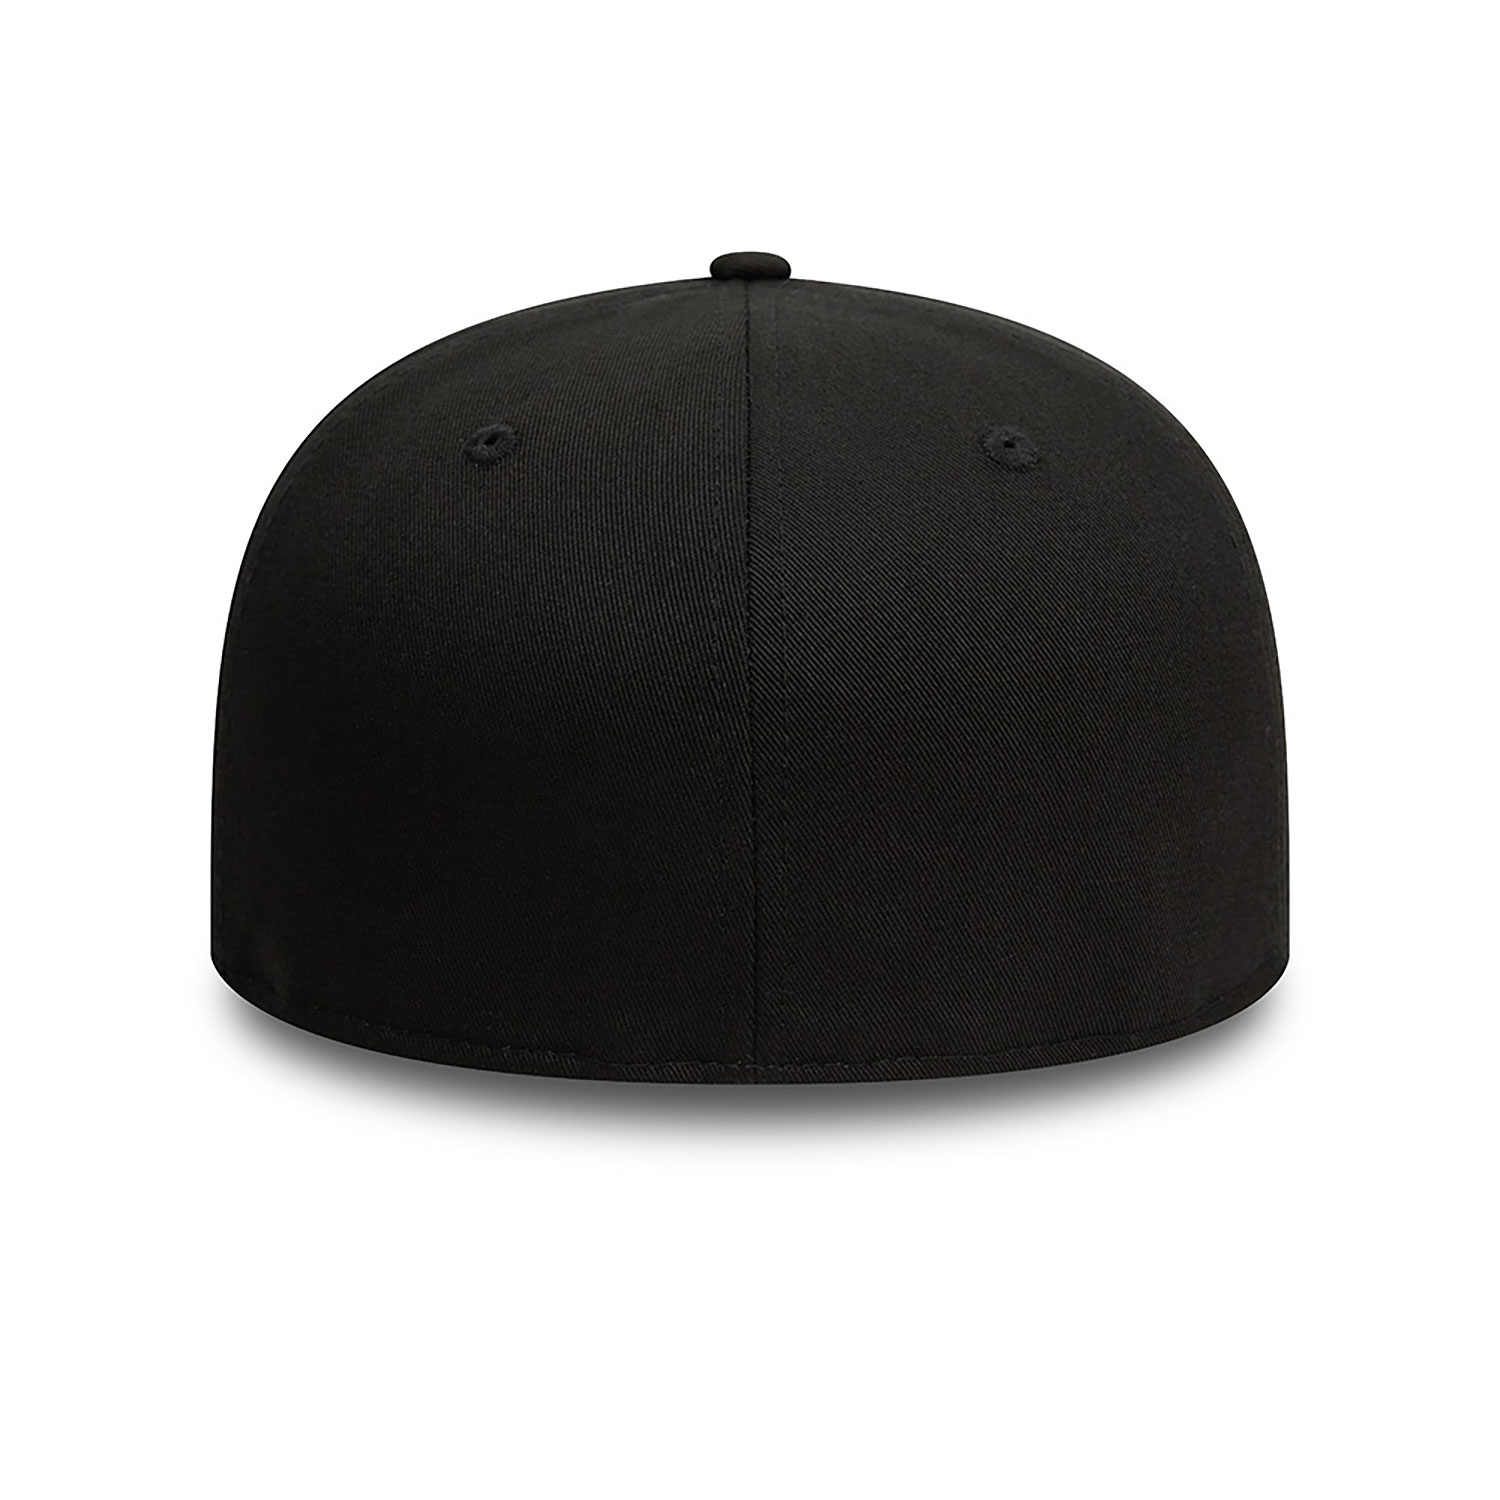 Gizmo Festive Germilins Black 59FIFTY Fitted Cap